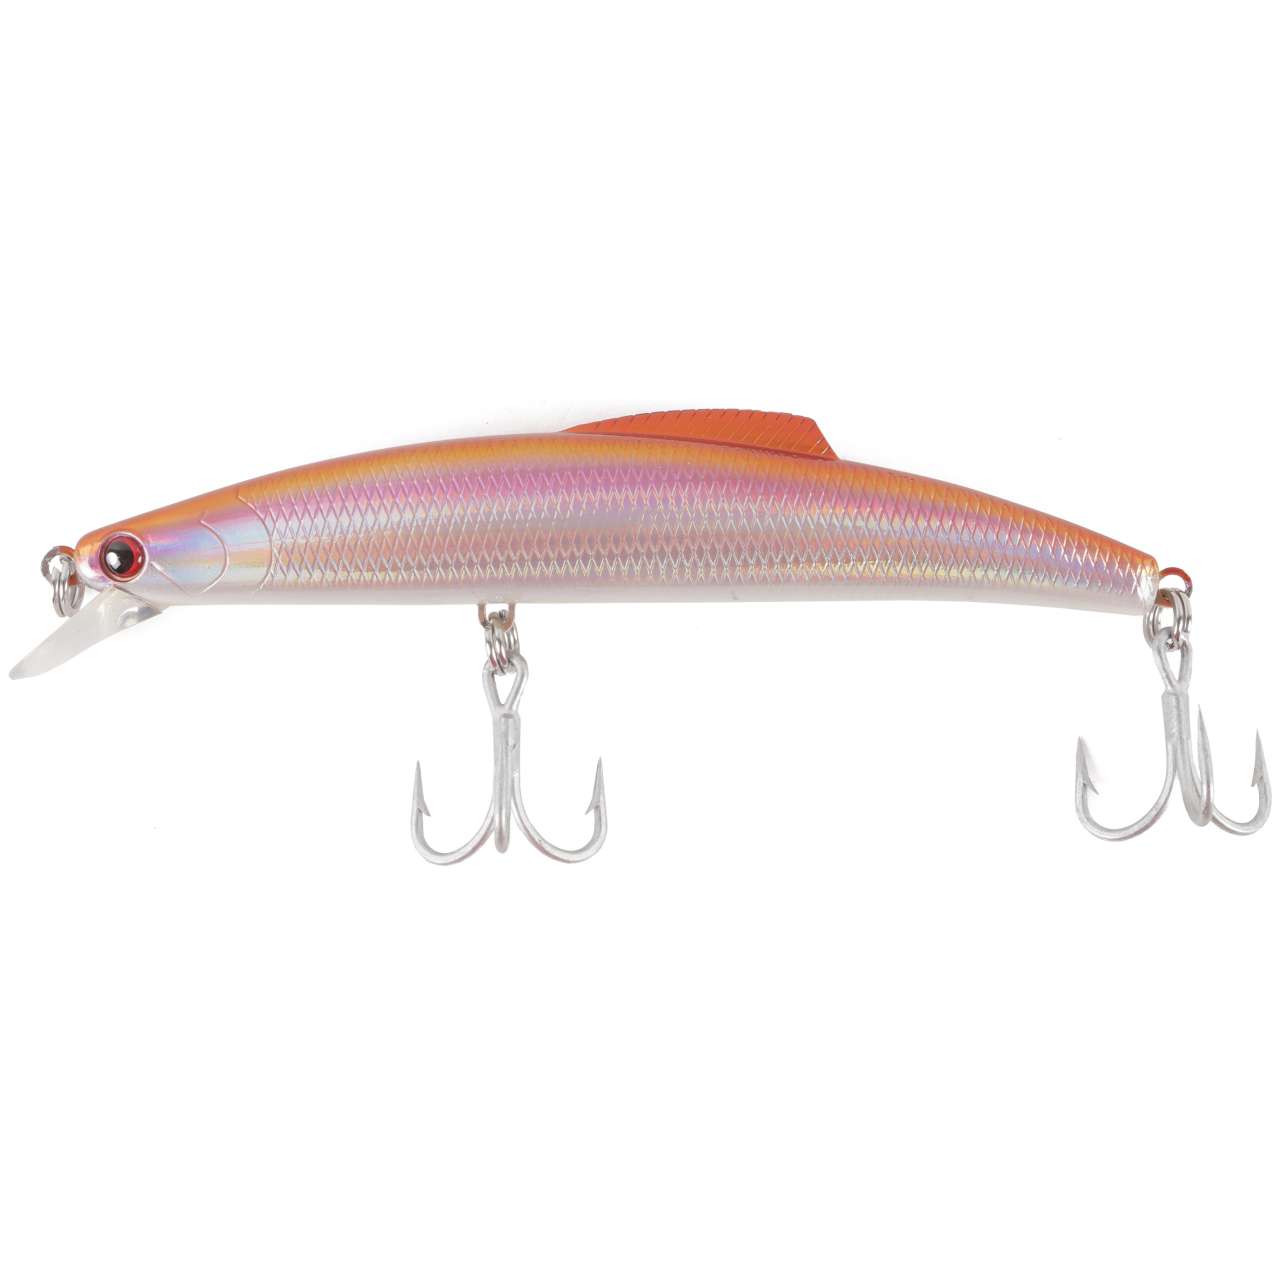 1/4 oz. Magooster with Pink Fly – Magooster Tackle Co.